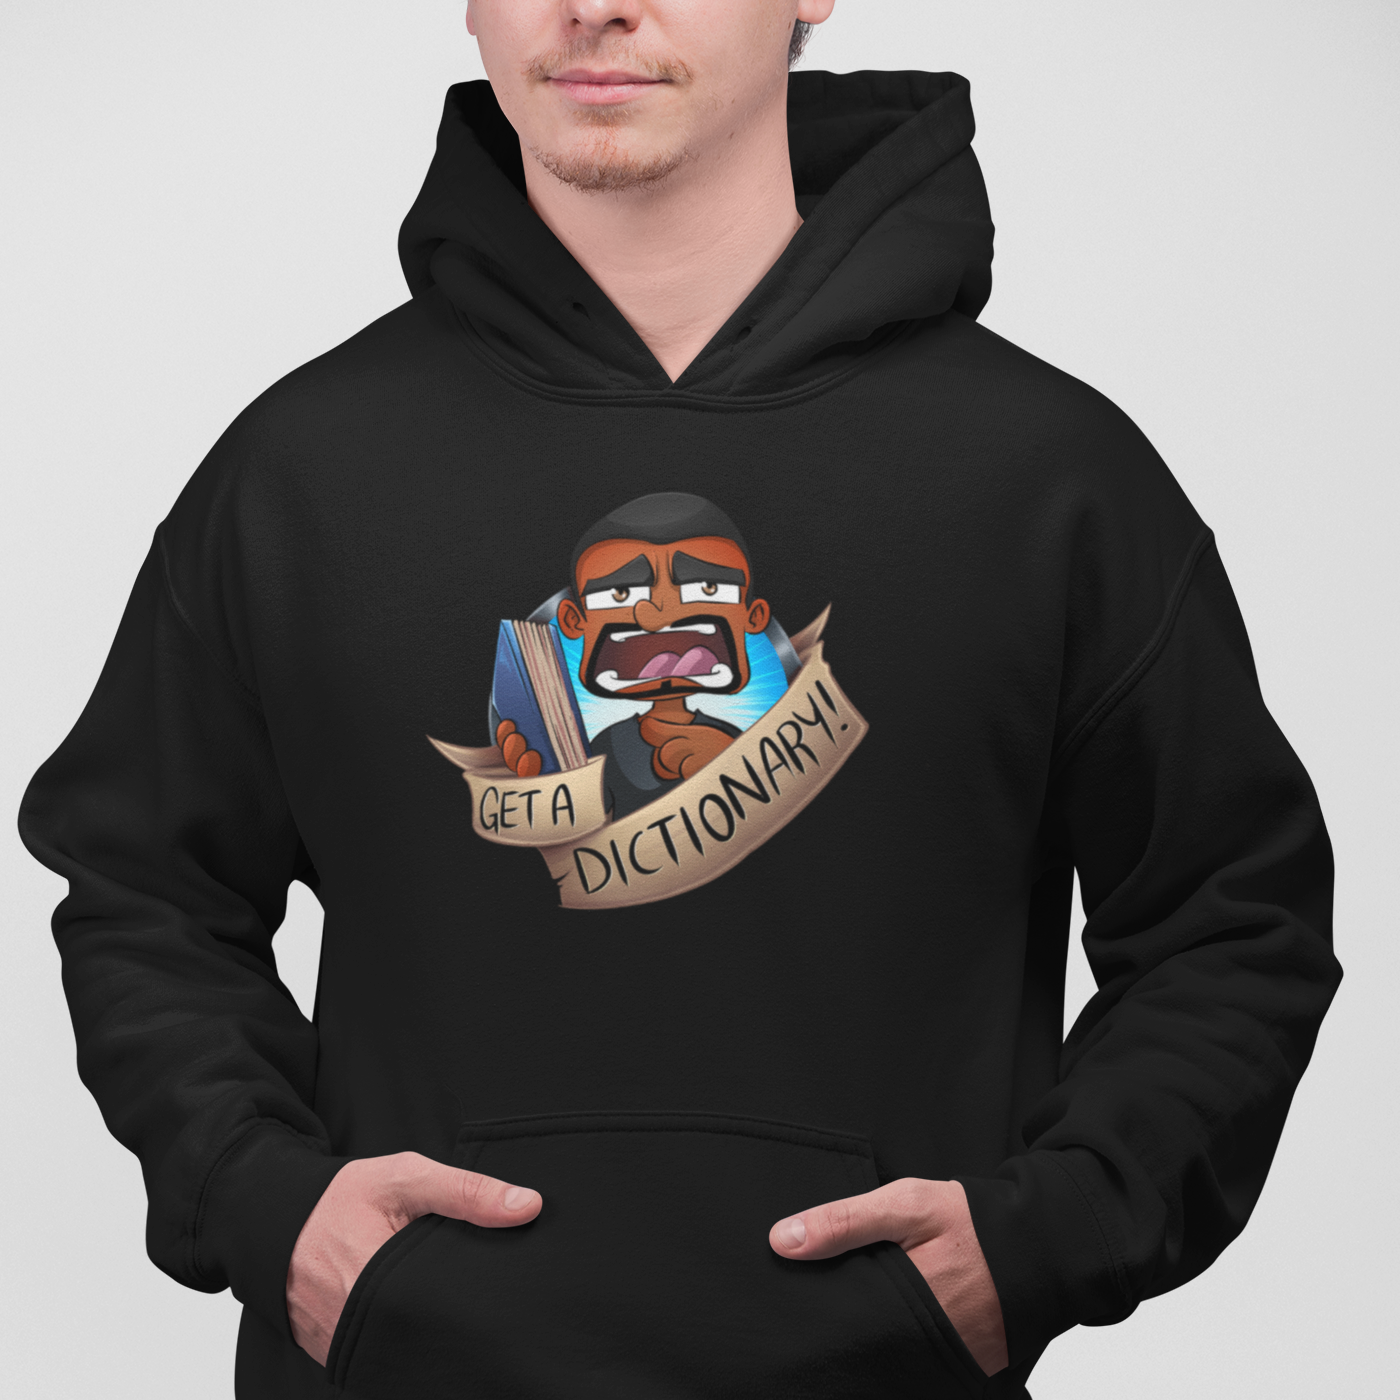 Get A Dictionary Unisex Hoodie